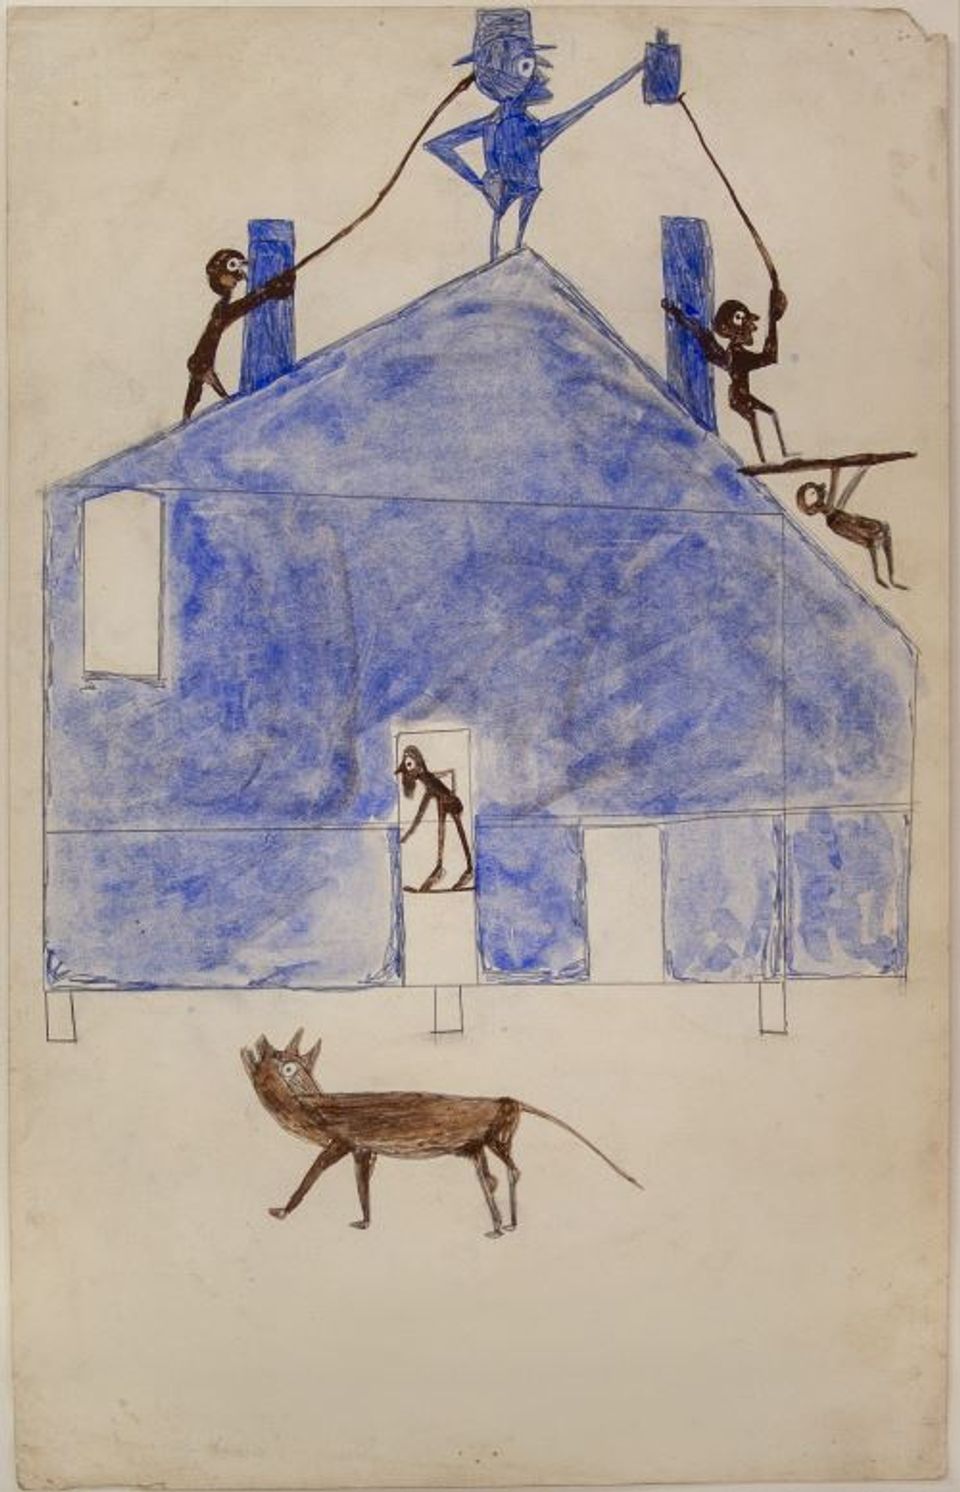 Blue house from the exhibition "Between Worlds: The Art of Bill Traylor"